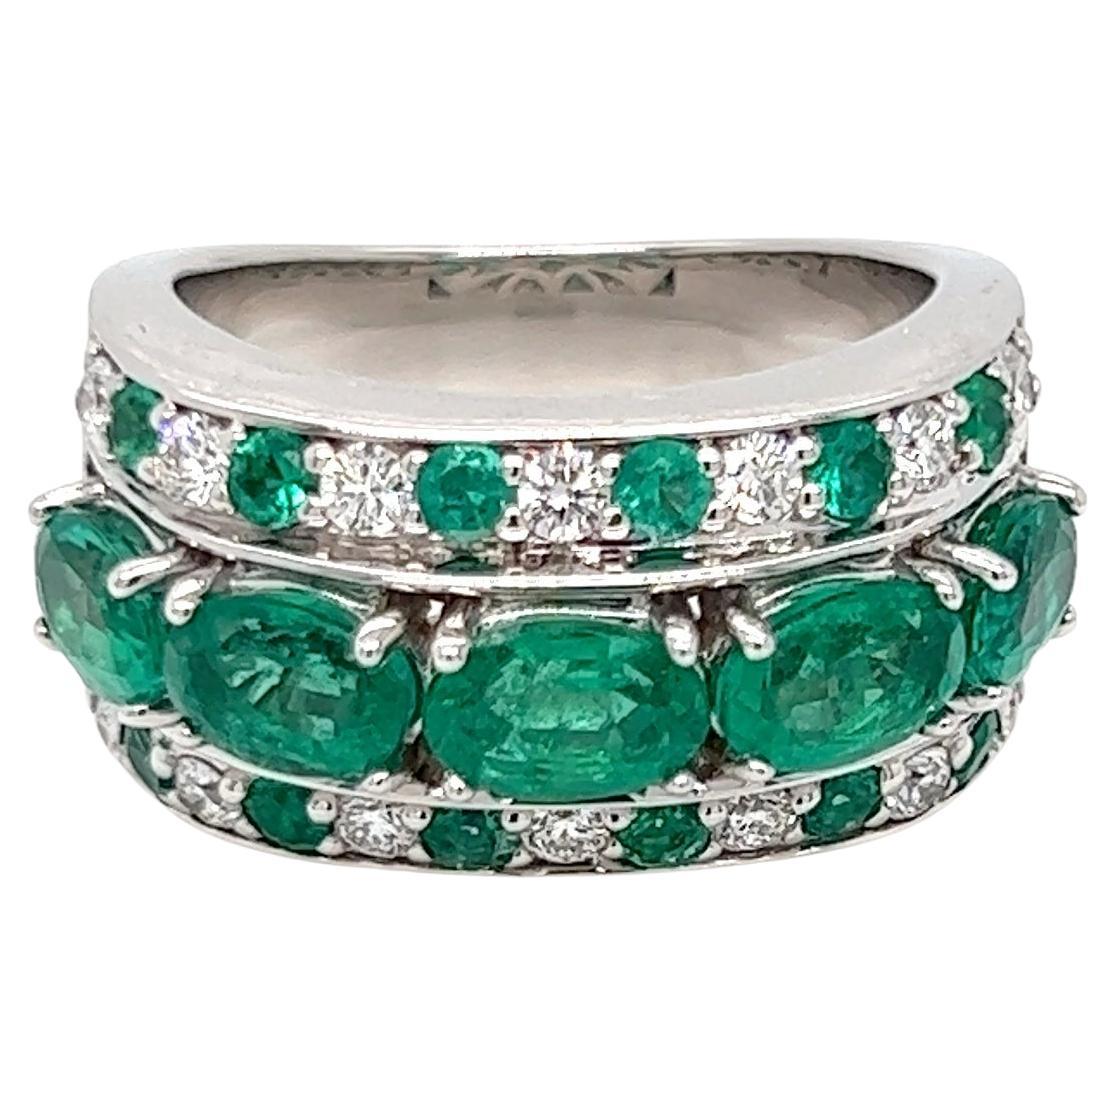 3.32 Carats Emerald and Diamond Ring in White Gold